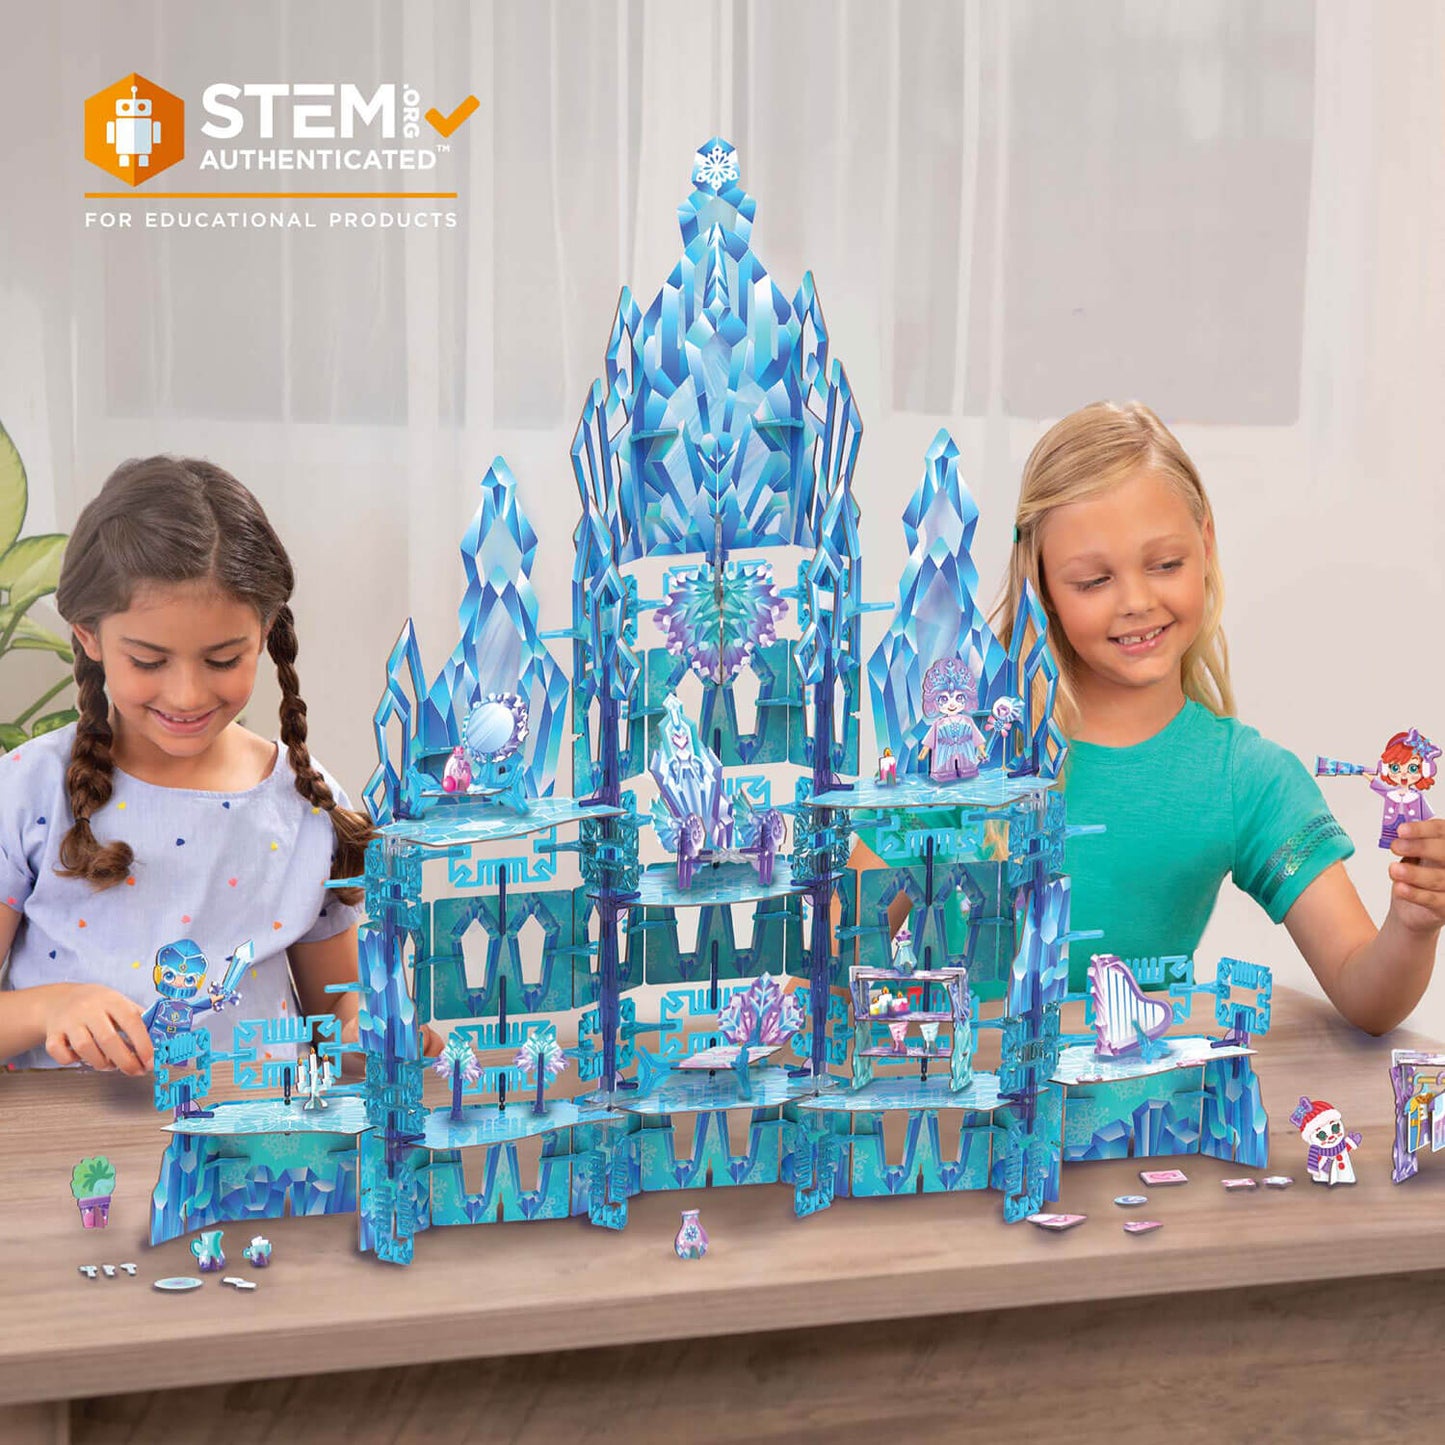 Pinxies Enchanted Ice Castle is a STEM authenticated building set for ages 6+